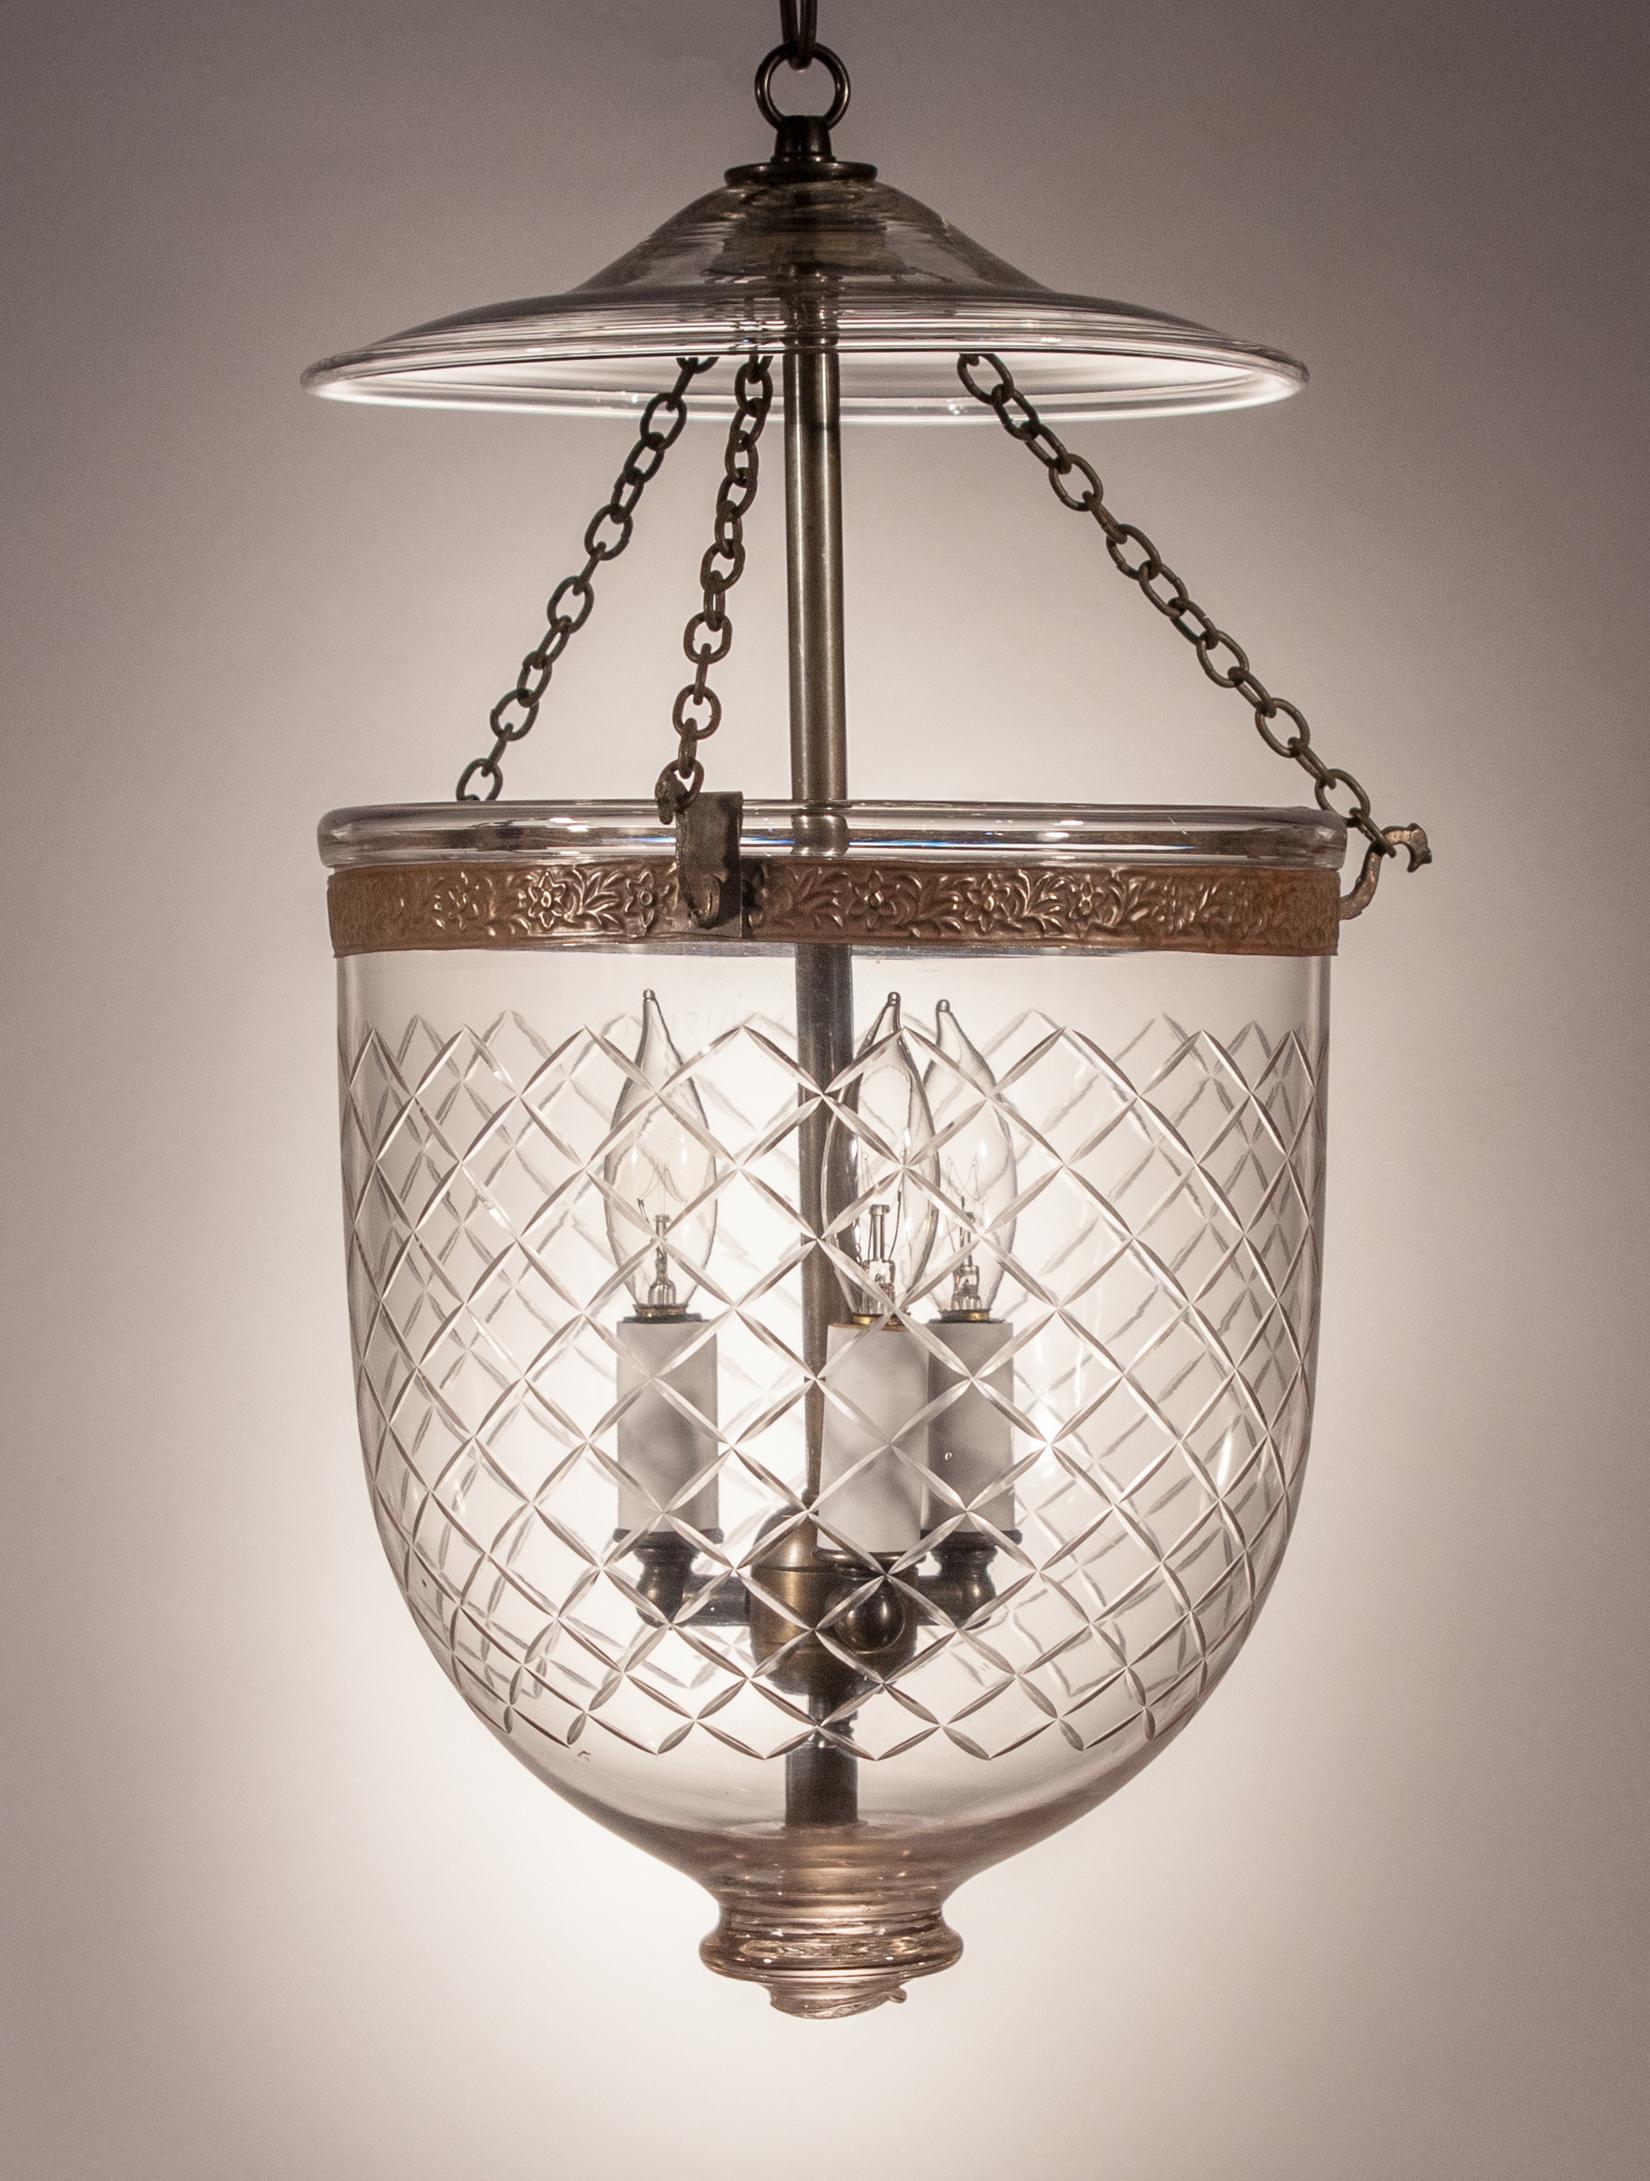 A lovely antique bell jar lantern manufactured by S&C Bishop, England, circa 1890. The Bishop indicia appears on both the hand blown glass jar and pontil, which is rare. The Waterford-style diamond etching is a nice complement to this petite